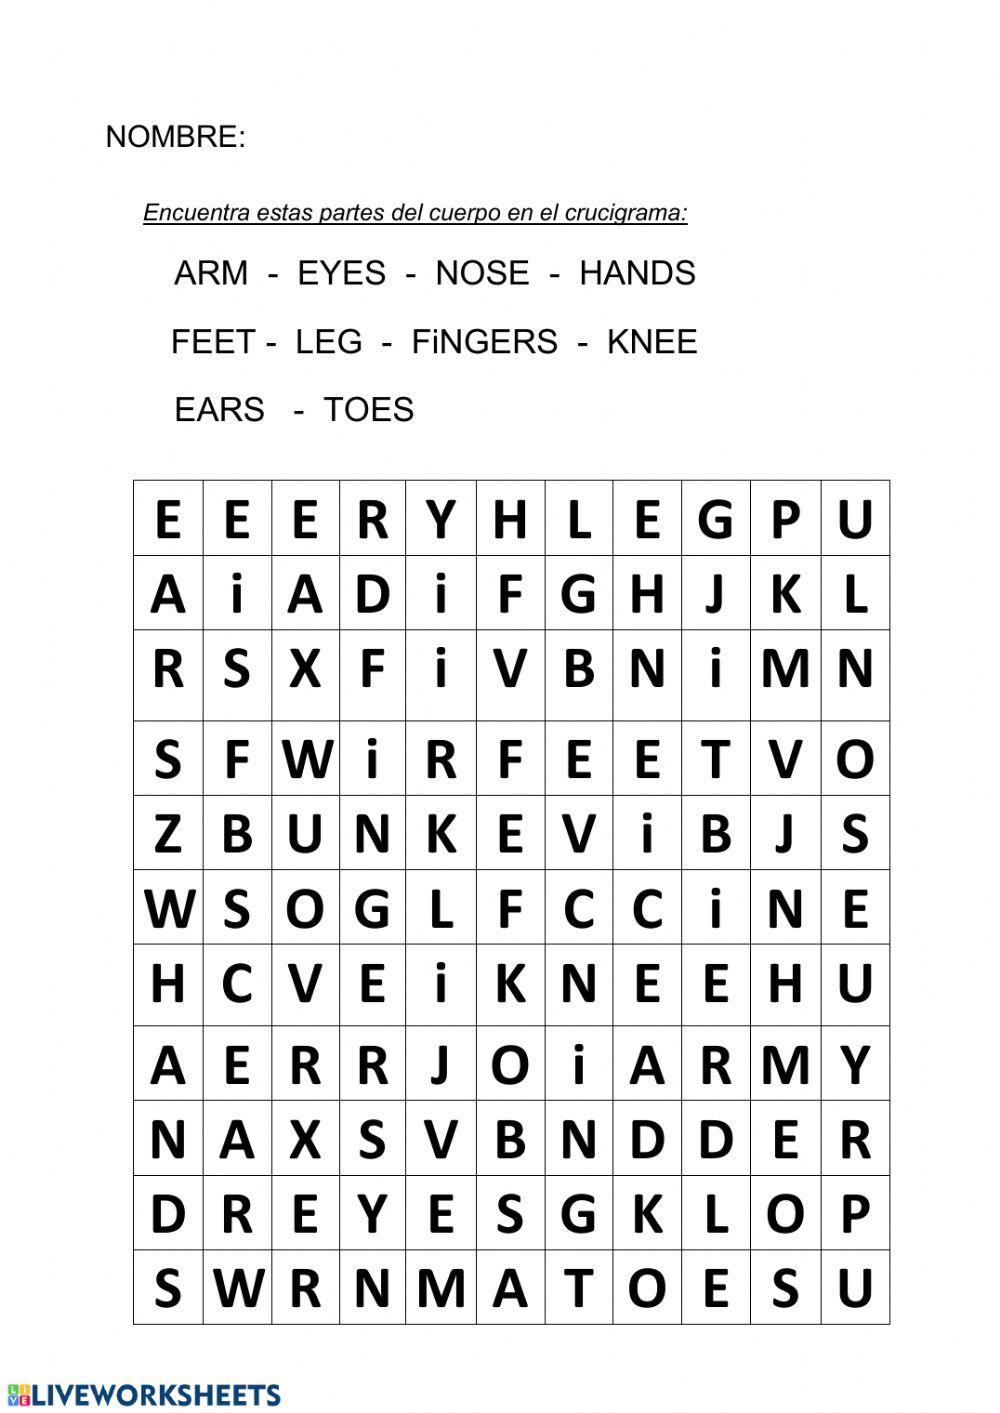 Body parts wordsearch